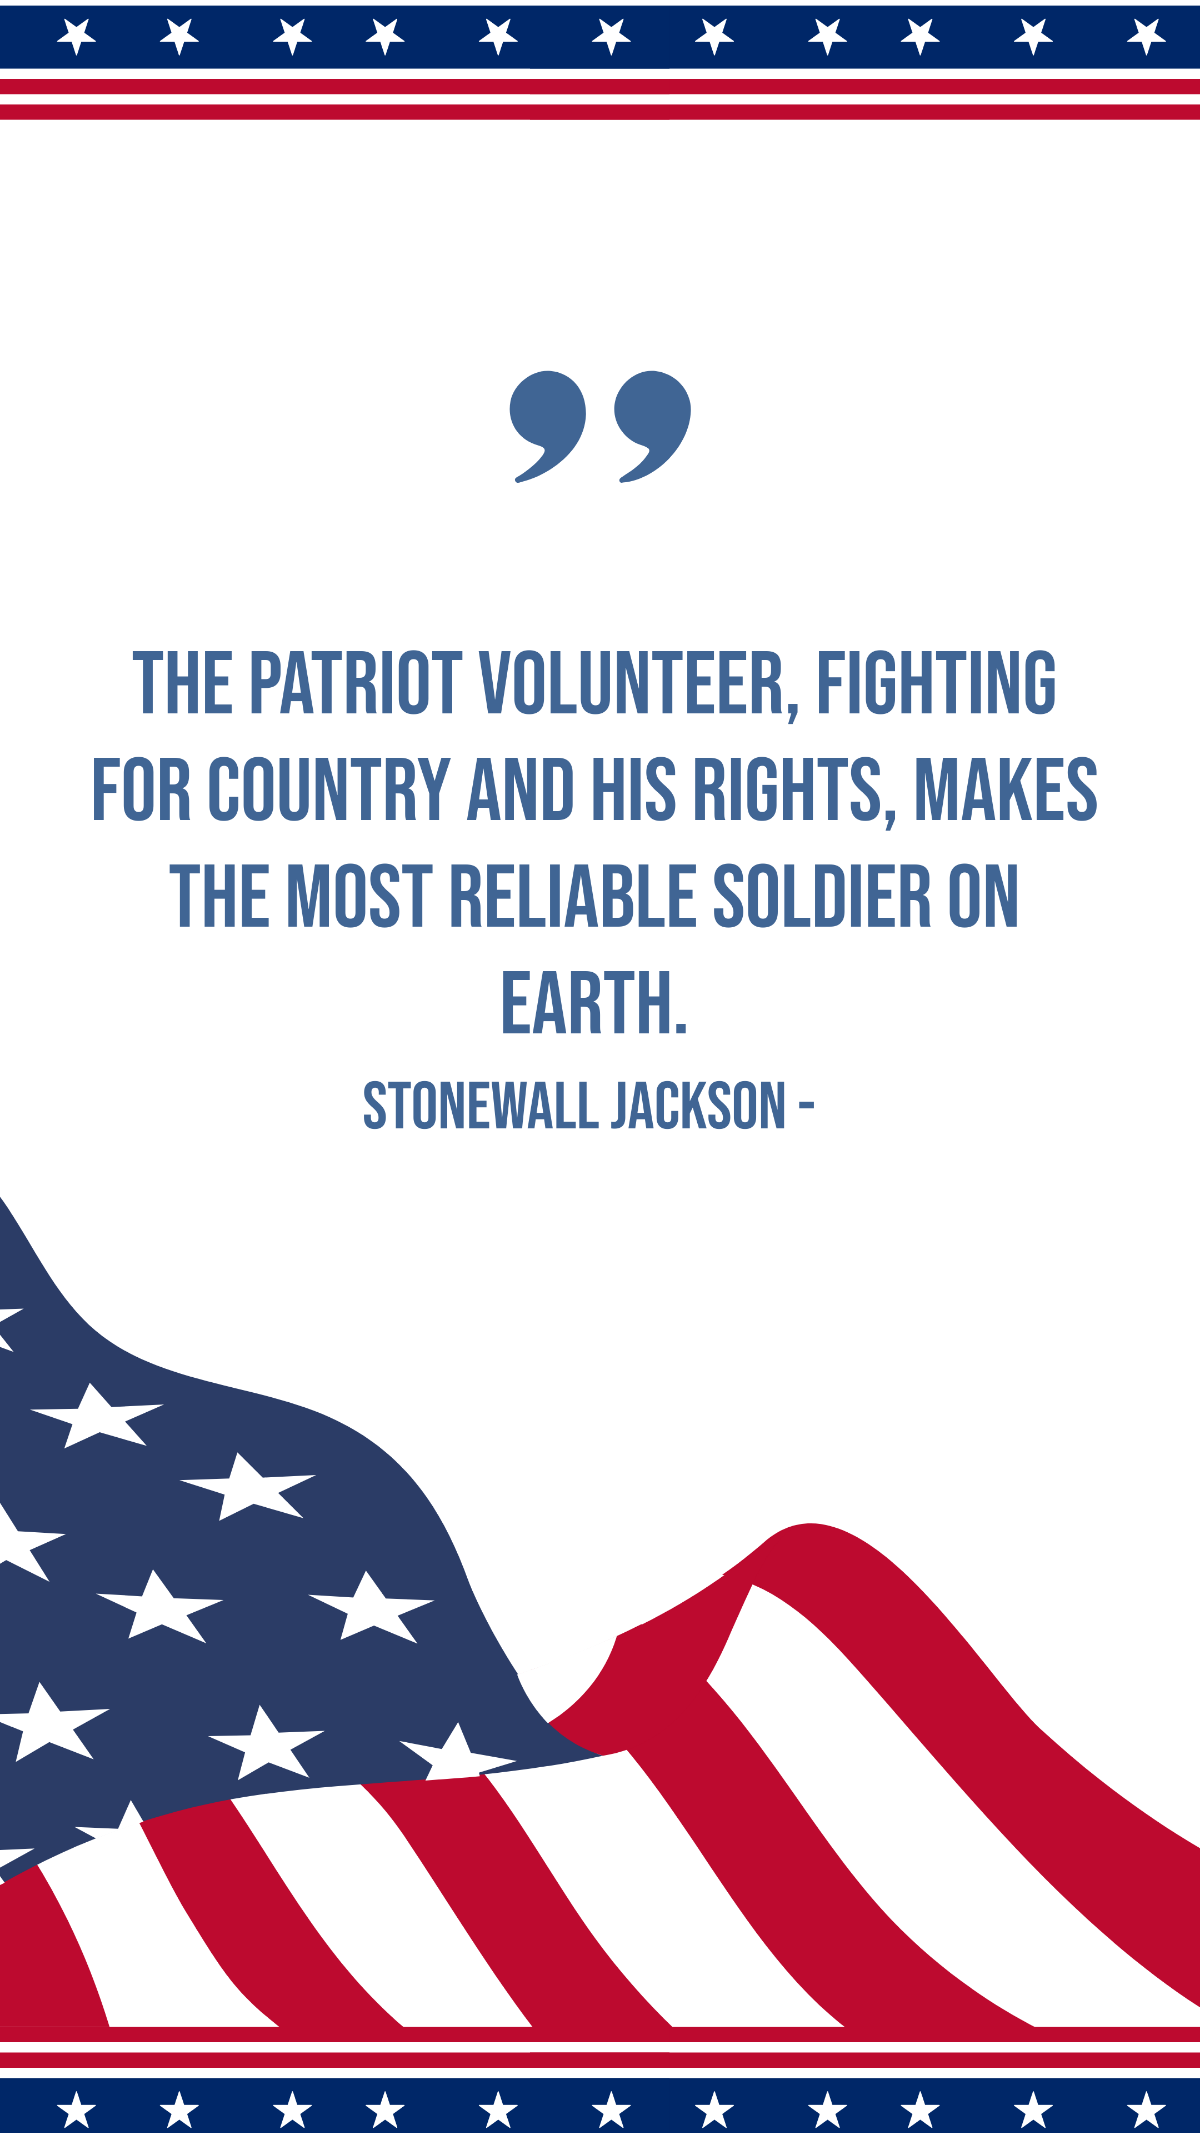 Stonewall Jackson - The patriot volunteer, fighting for country and his rights, makes the most reliable soldier on earth. Template